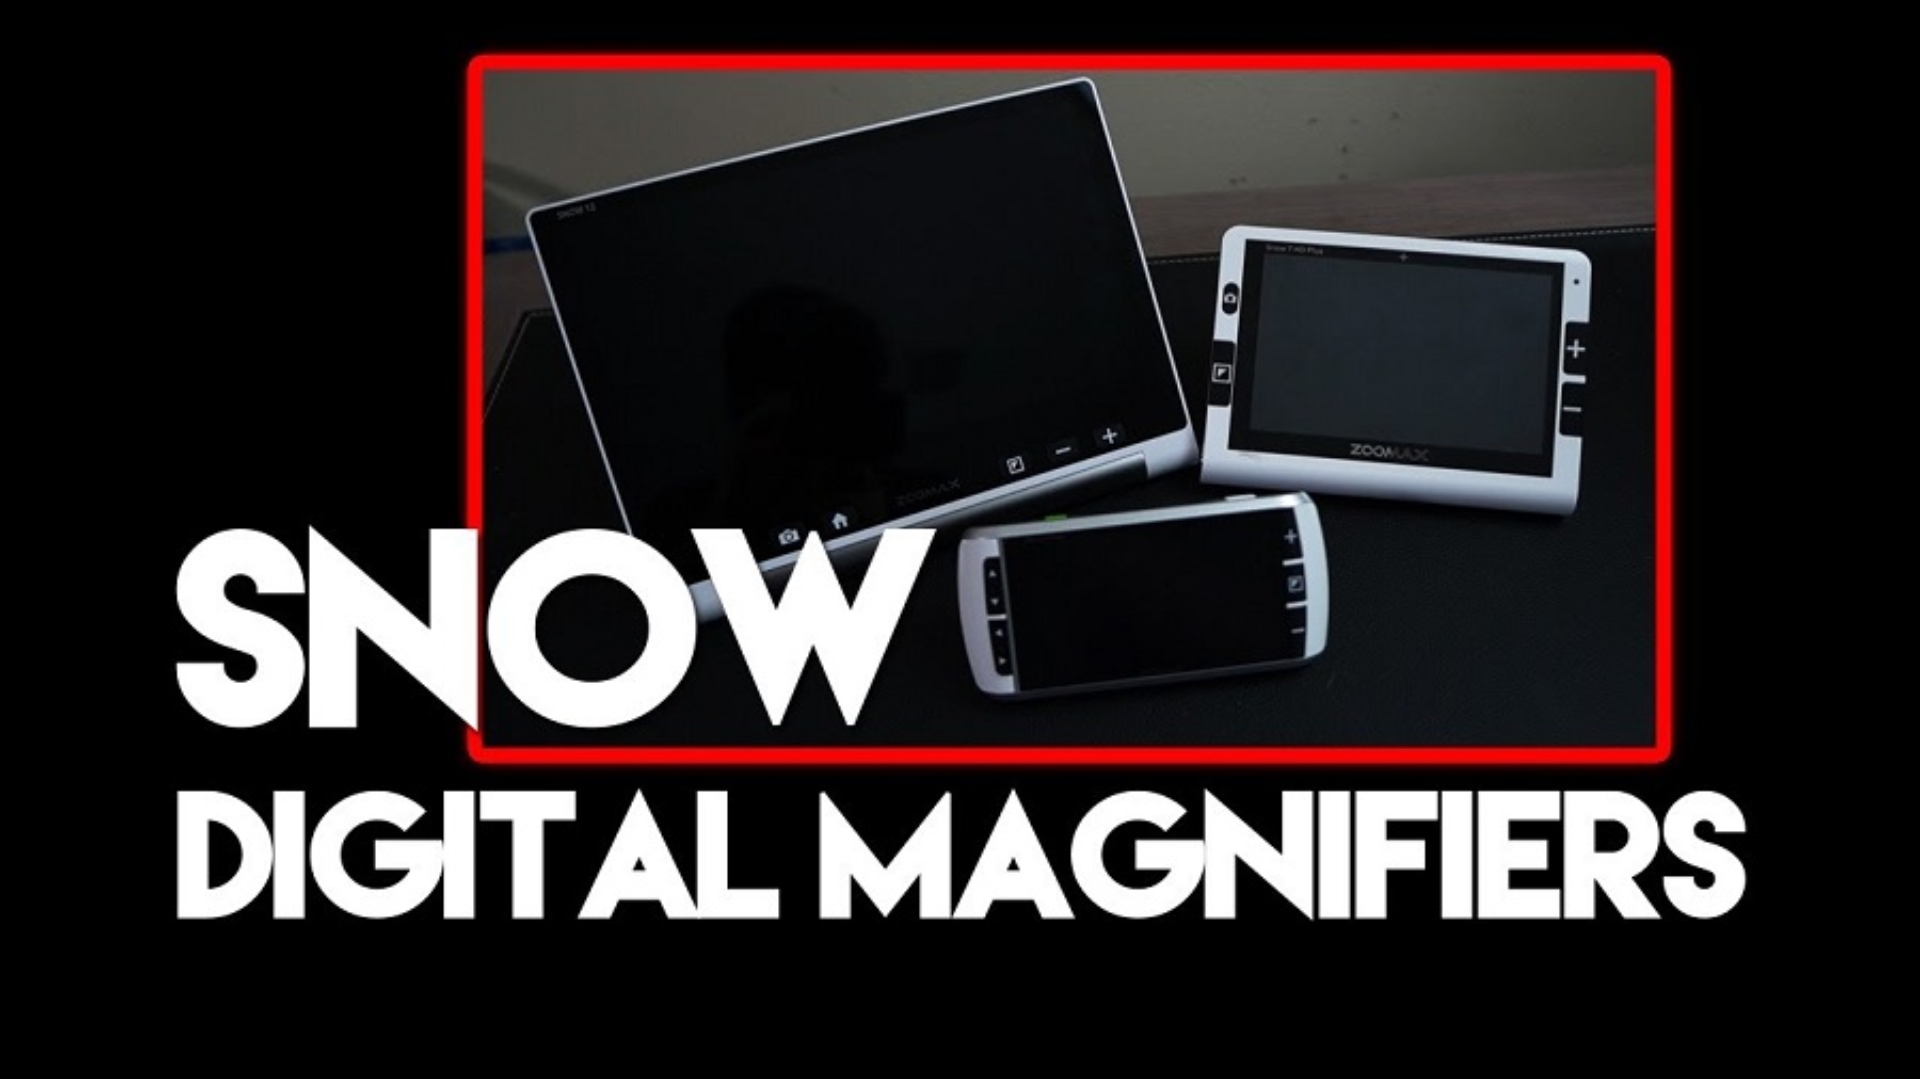 The Snow Digital Magnifier